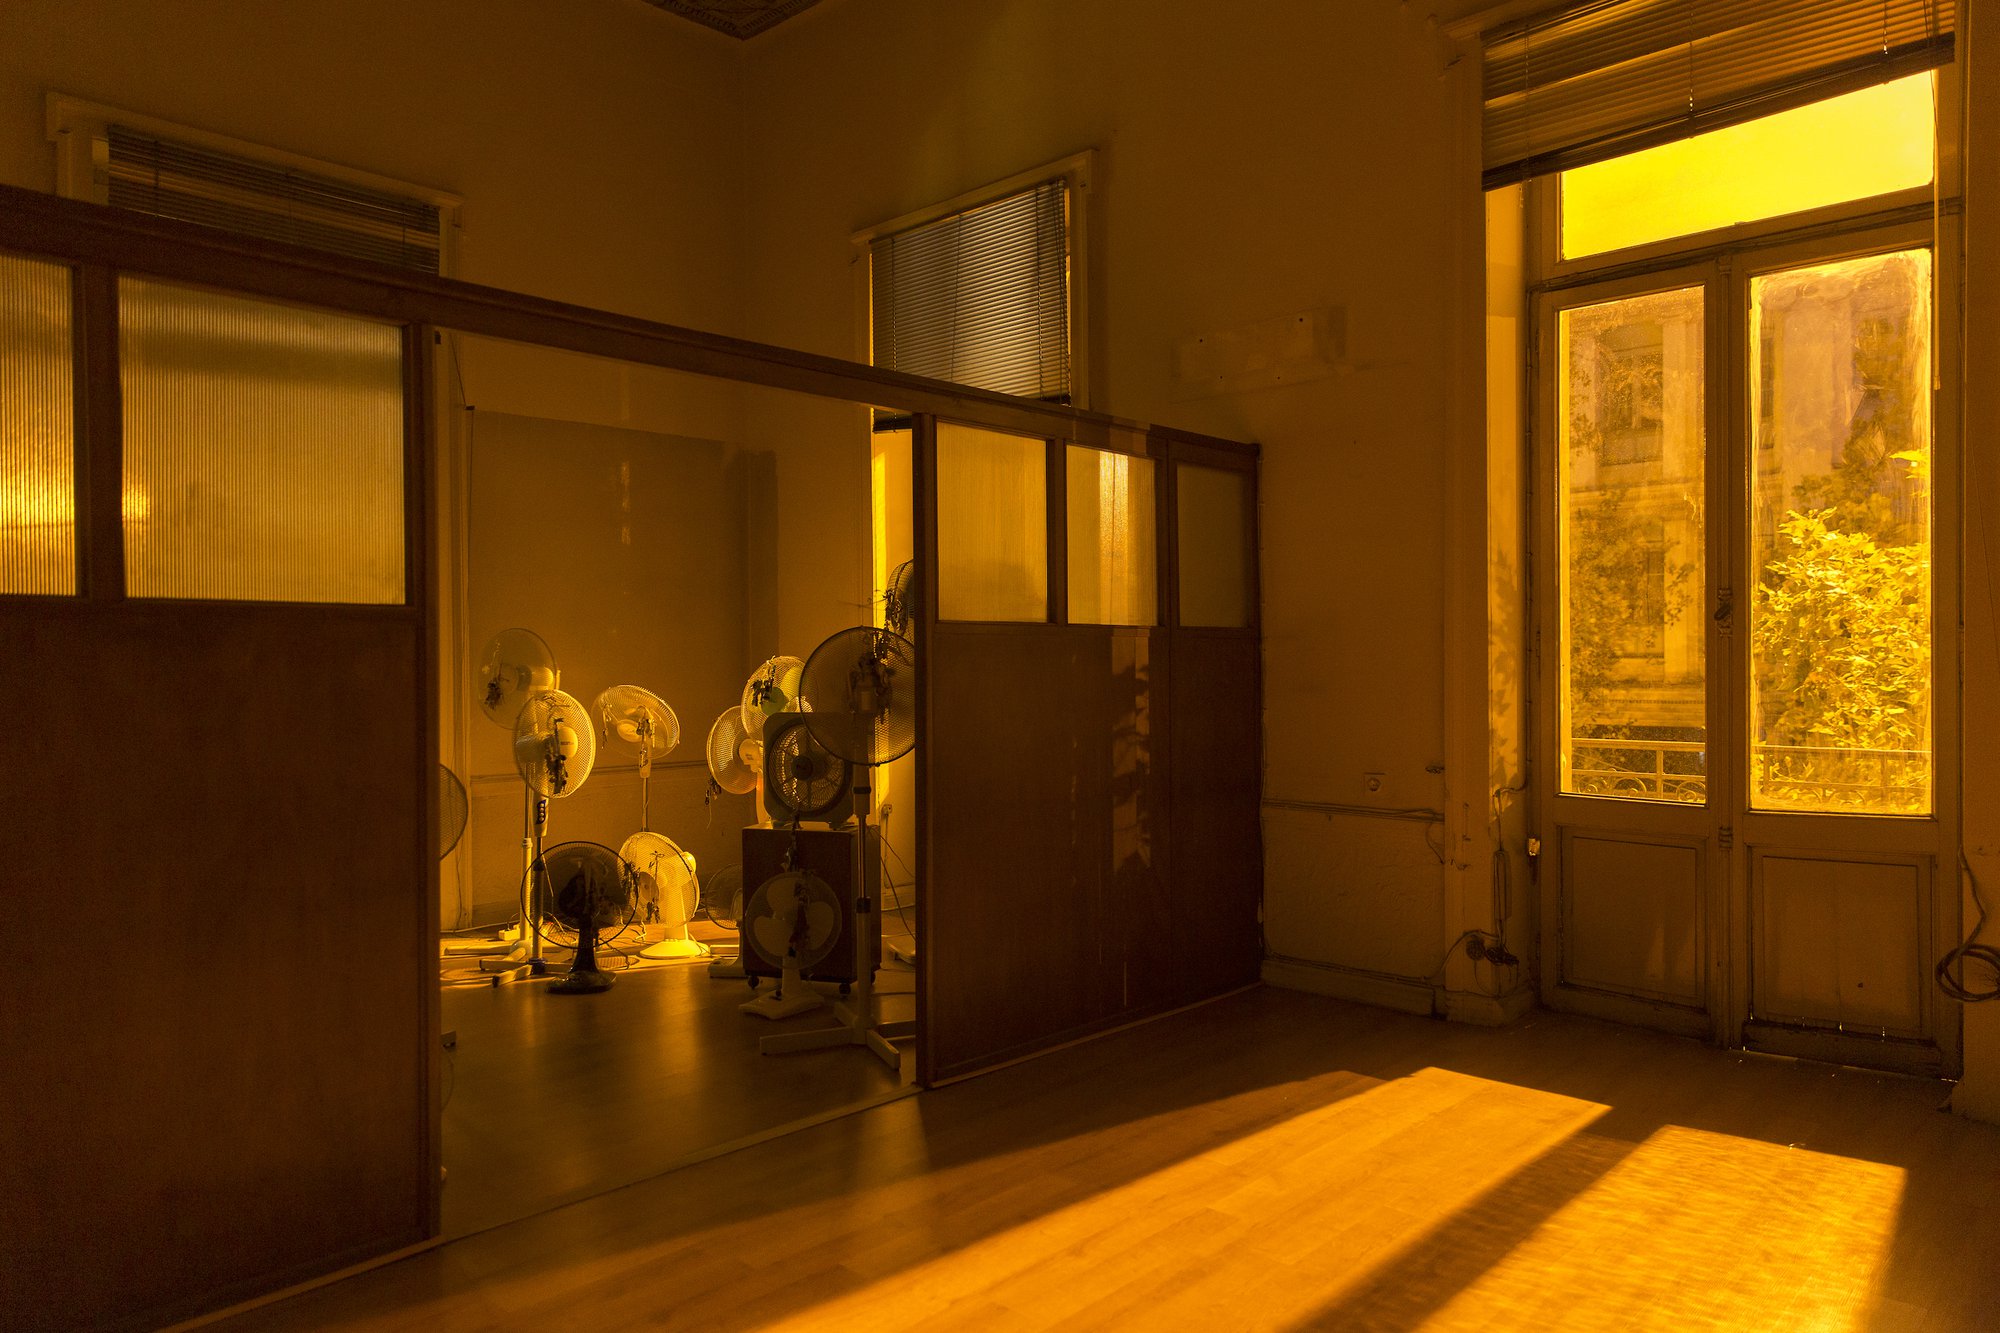 Iris Touliatou, Emotional Infinity (The sound of them coming back amplified and looped), fans, house keys, key chains, string, ribbons, gift bows, wire, timers, multiplugs, outlets, dimensions variable, 2021. Installation view, Eclipse, 7th Athens Biennial, Athens, 2021